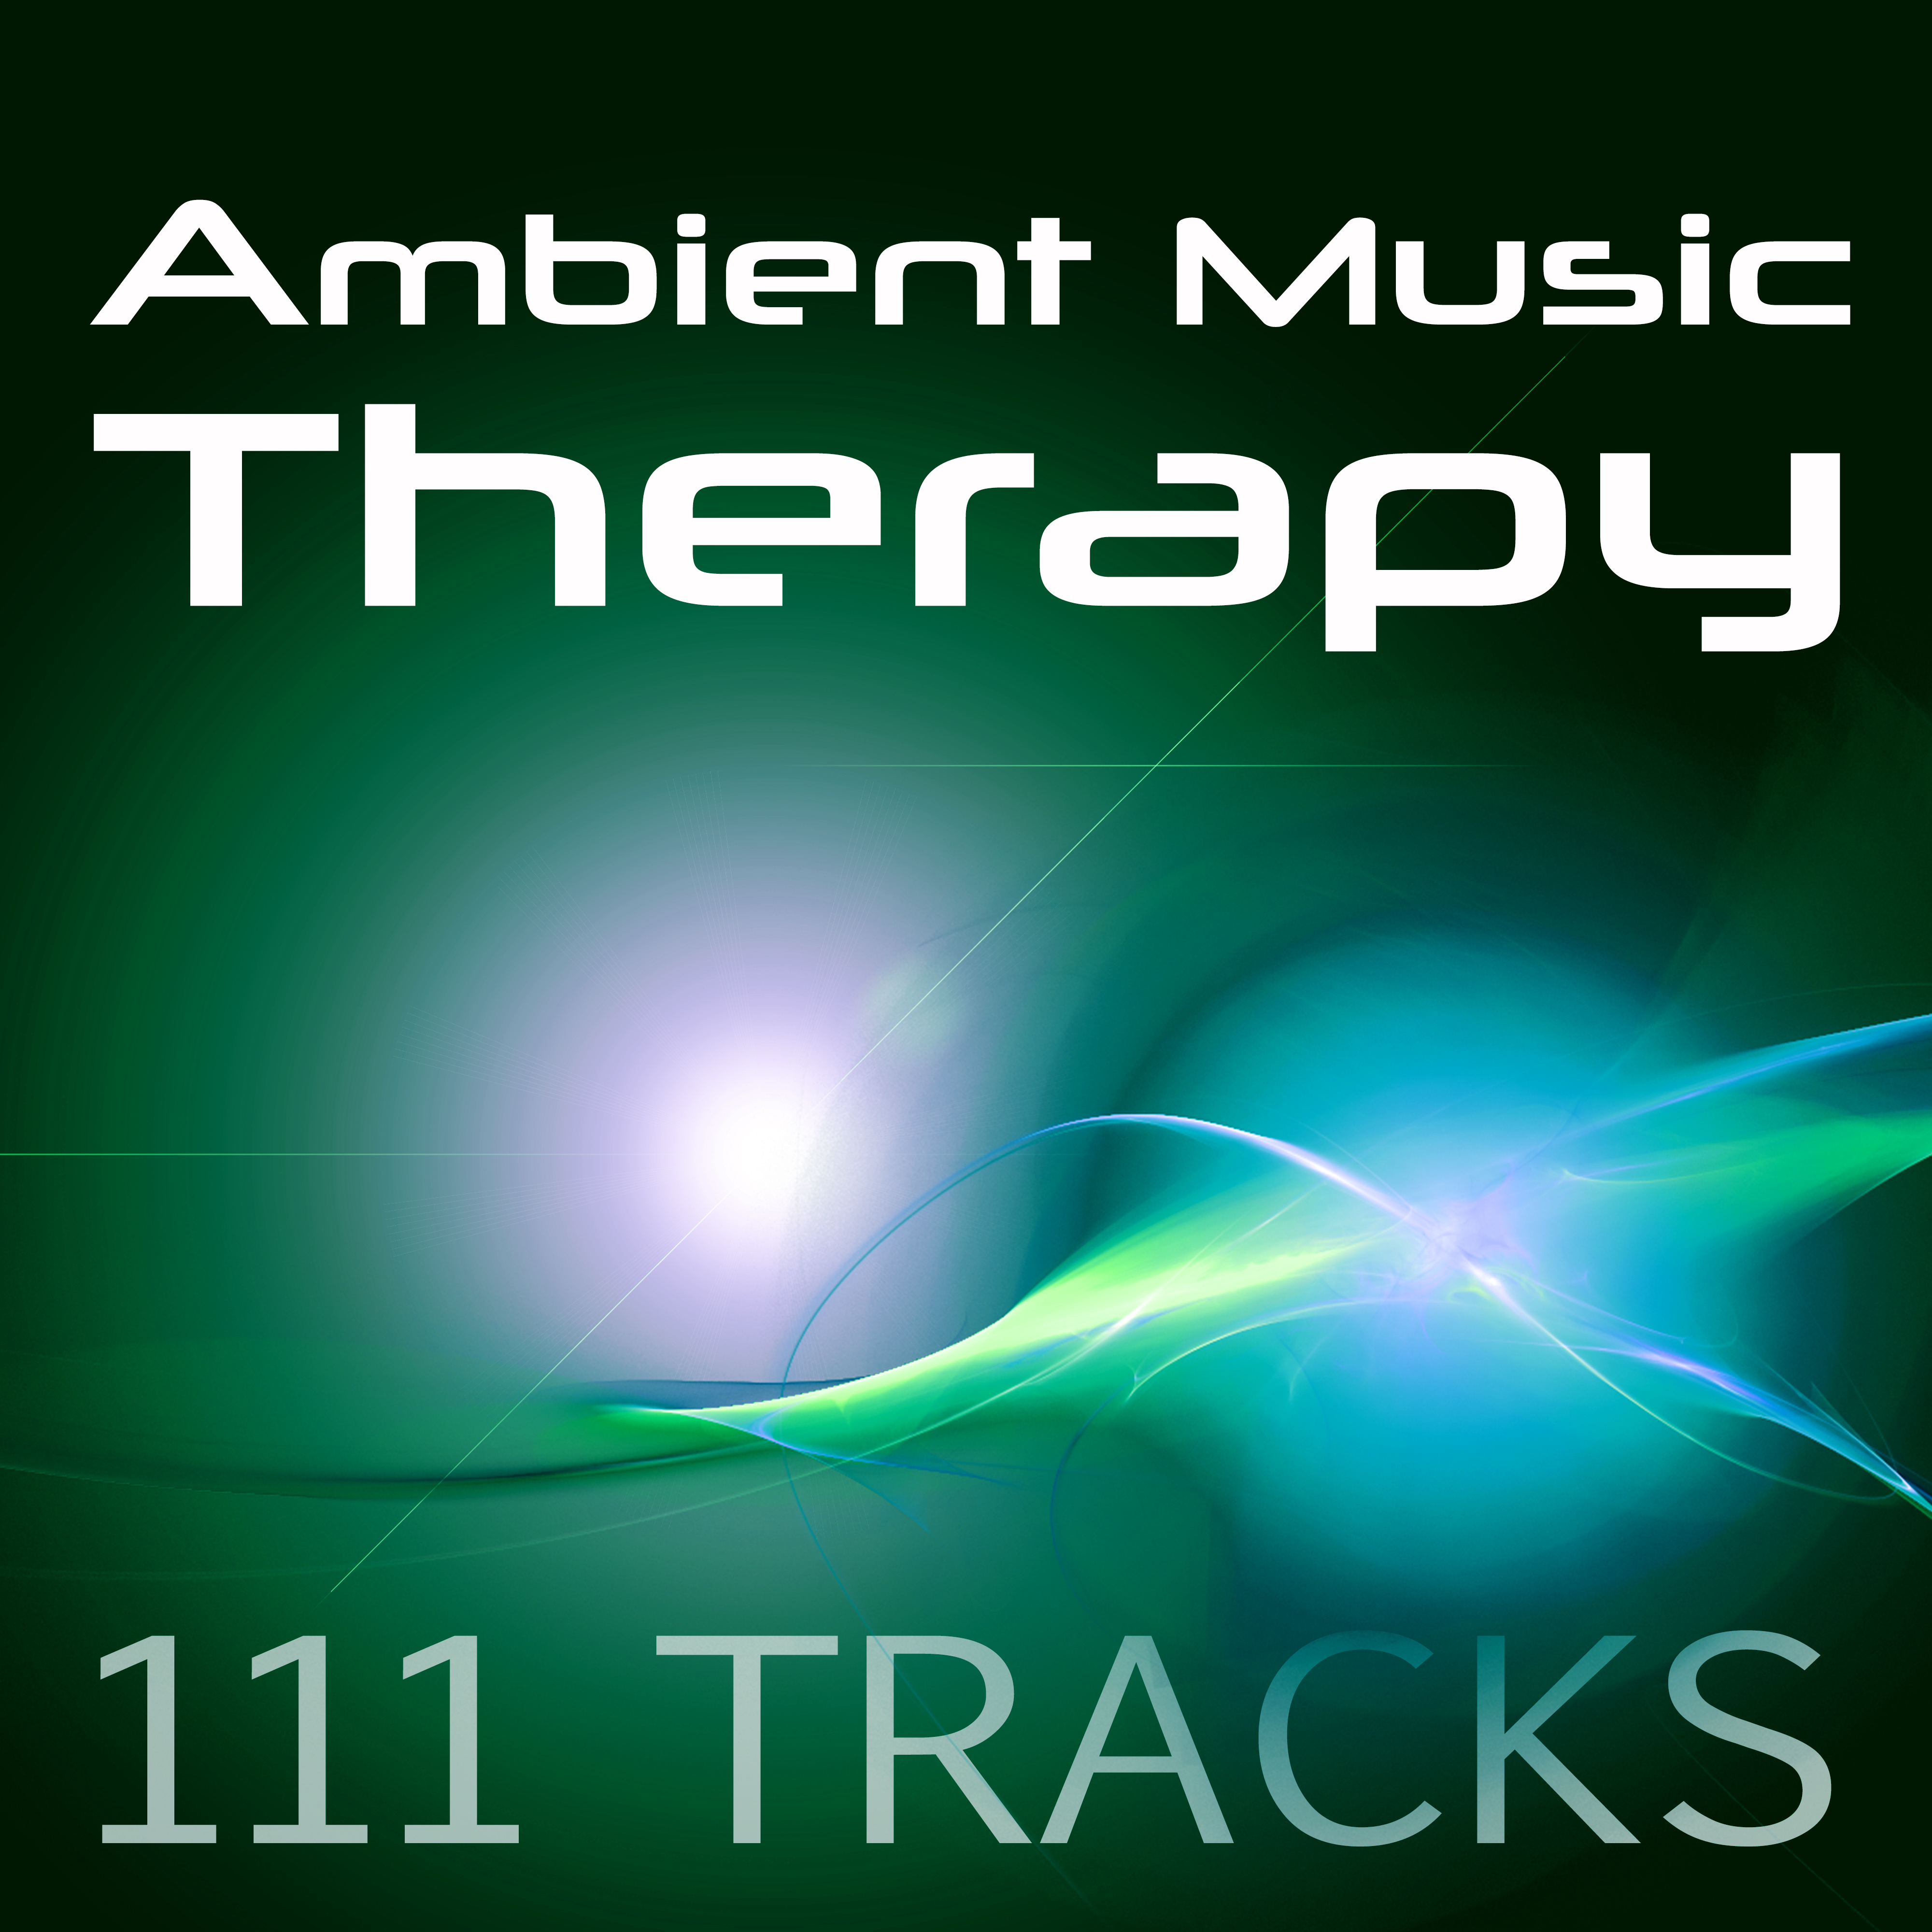 Ambient Music Therapy: 111 Tracks – White Noise for Deep Sleep, Relaxation Meditation, Asian Zen Spa, Shiatsu Massage, Chill & Relax, New Age Music, Ambient Sounds for Wellness and Yoga